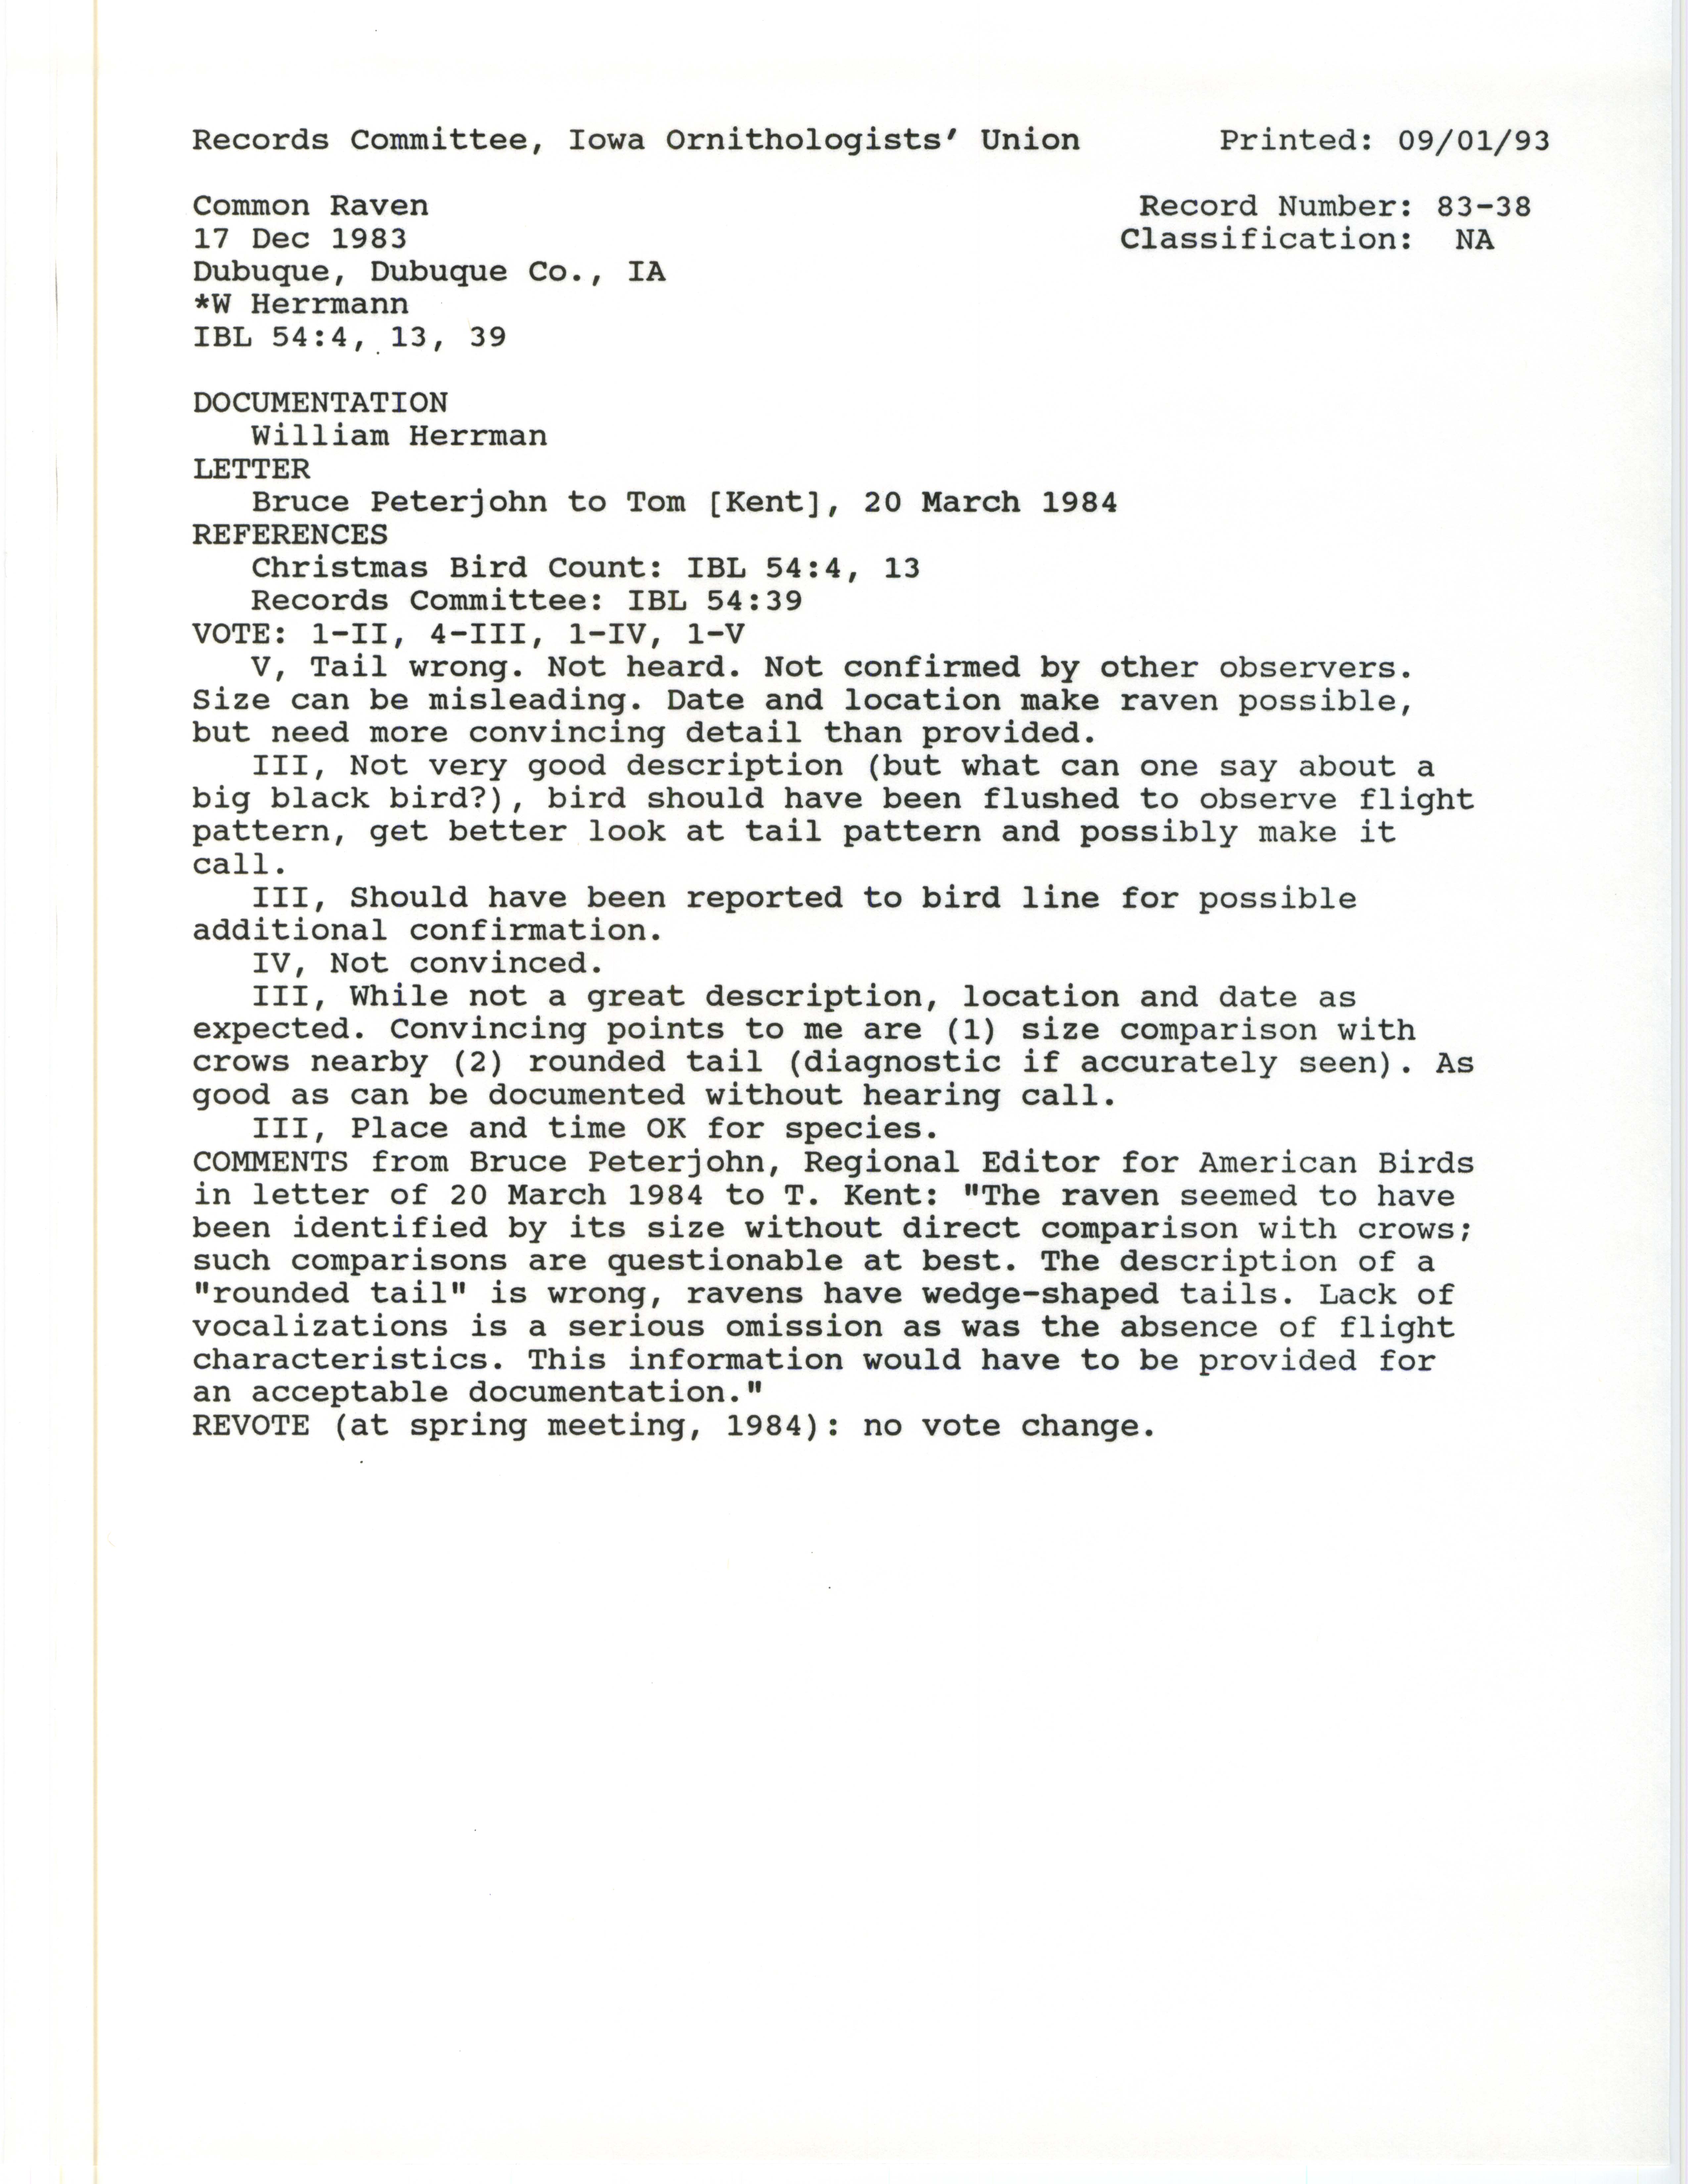 Records Committee review for rare bird sighting for Common Raven at Dubuque, 1983